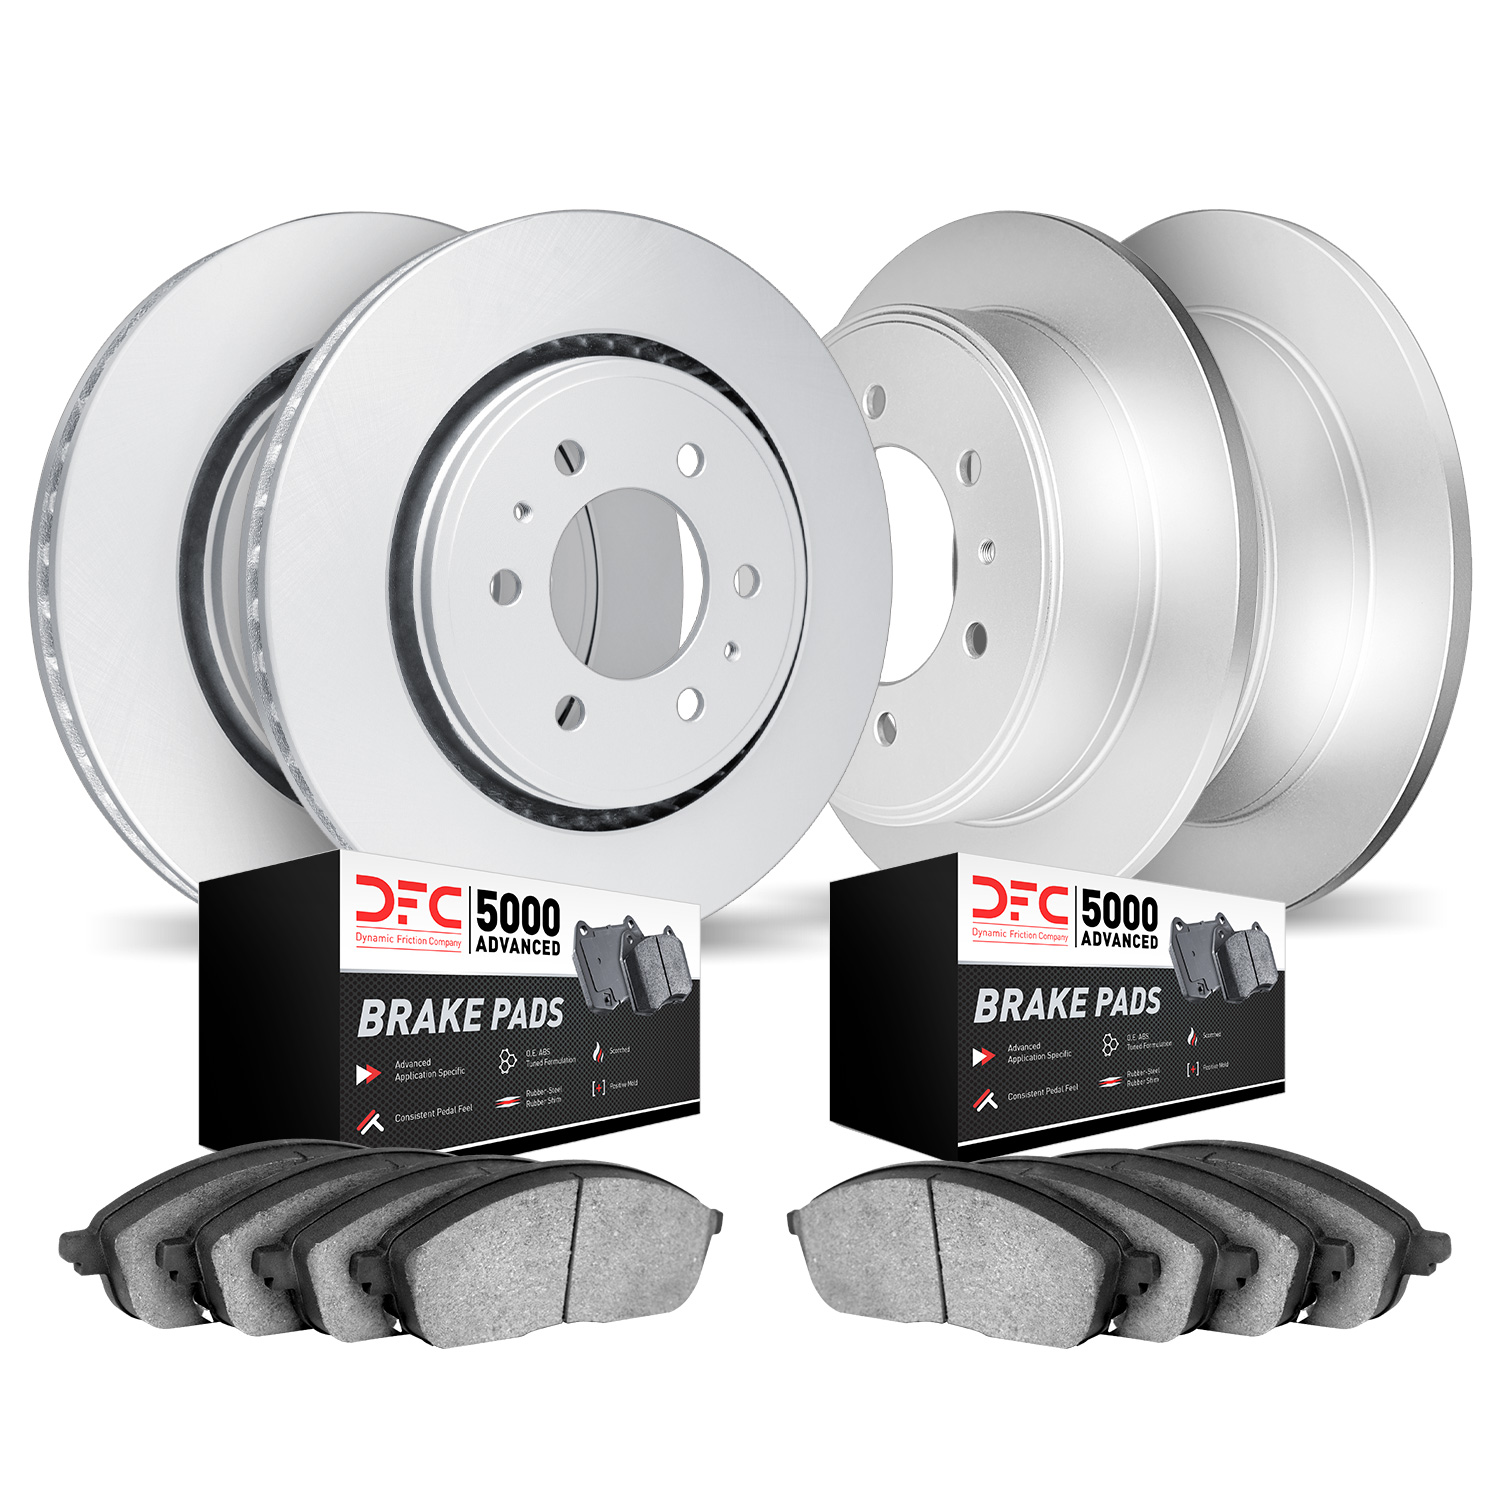 4504-63038 Geospec Brake Rotors w/5000 Advanced Brake Pads Kit, Fits Select Multiple Makes/Models, Position: Front and Rear